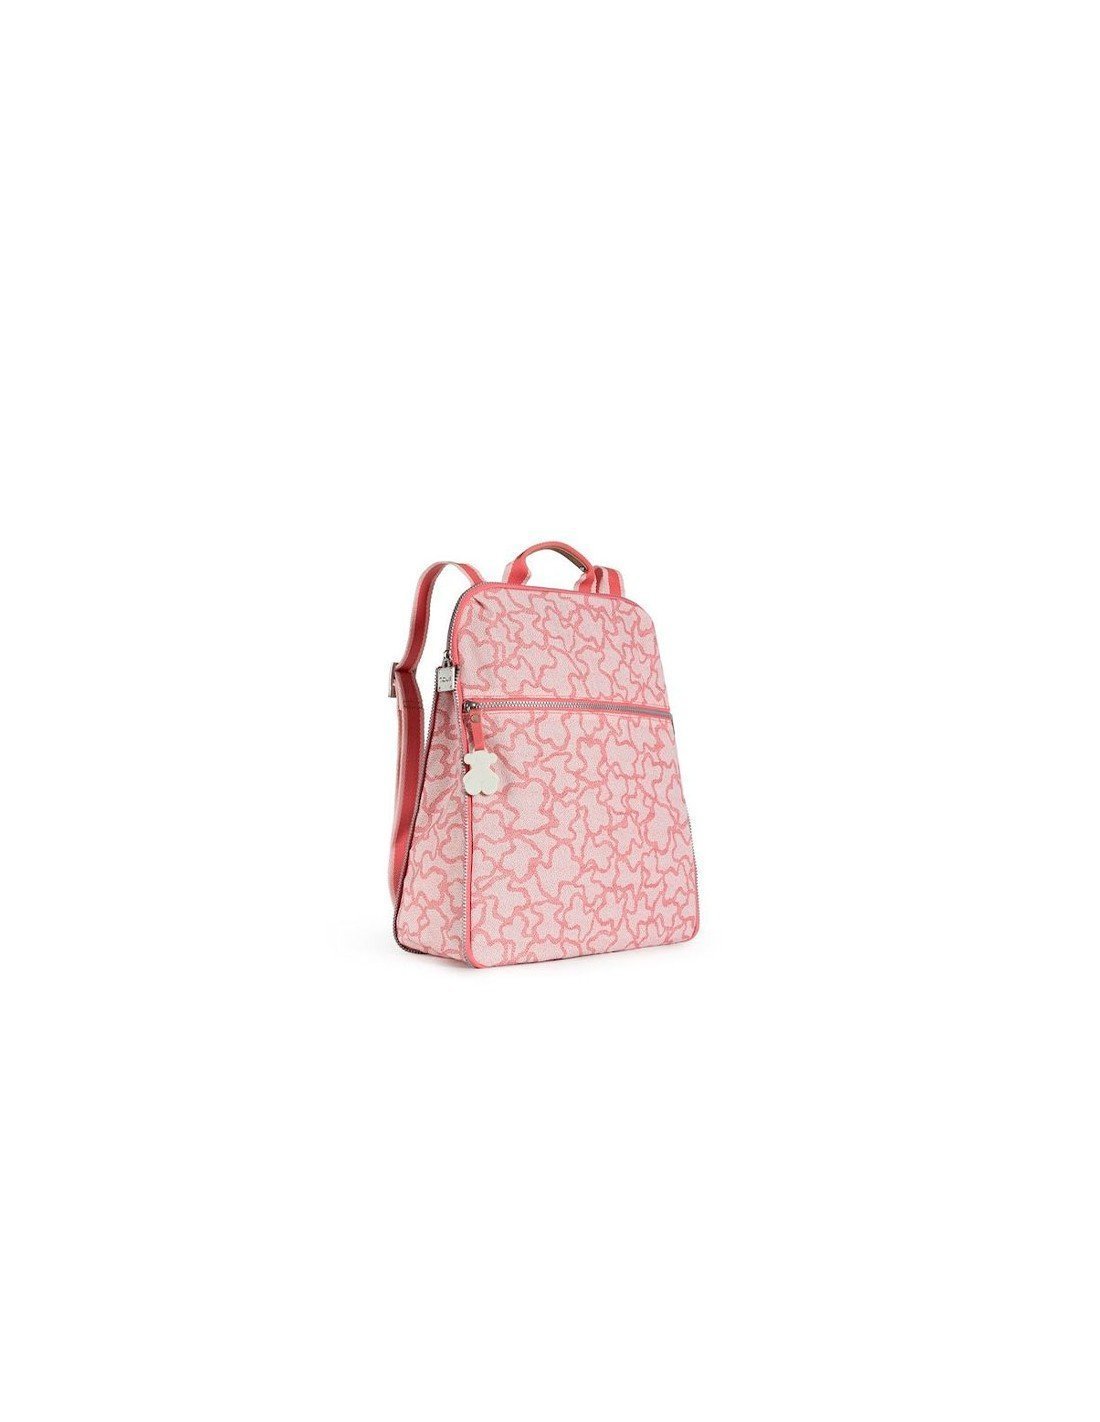 Tous Kaos New Colors Backpack In Pink Nylon, latest offers on Tous Moda  fashion accessories